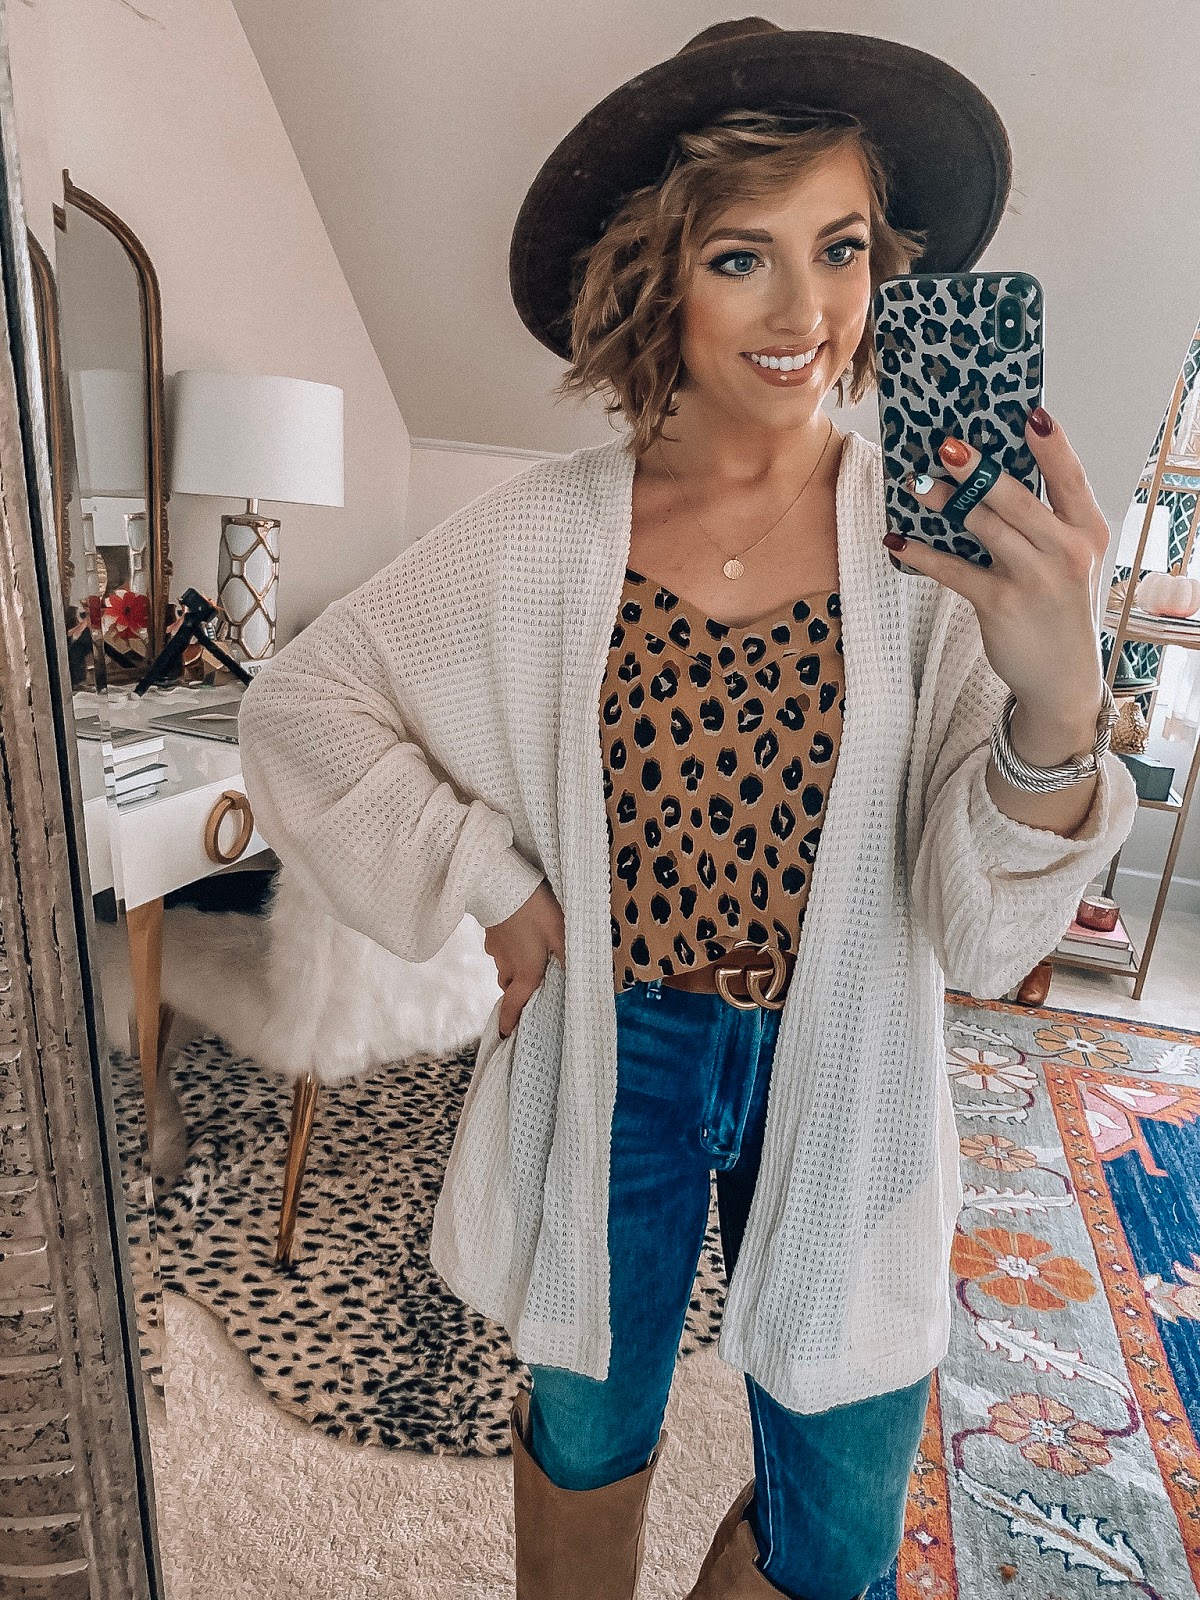 Recent Target Style Finds: Sweaters, Cardigans, Tops, Booties, Accessories & More! - Something Delightful Blog #fallstyle #affordablestyle #targetstyle